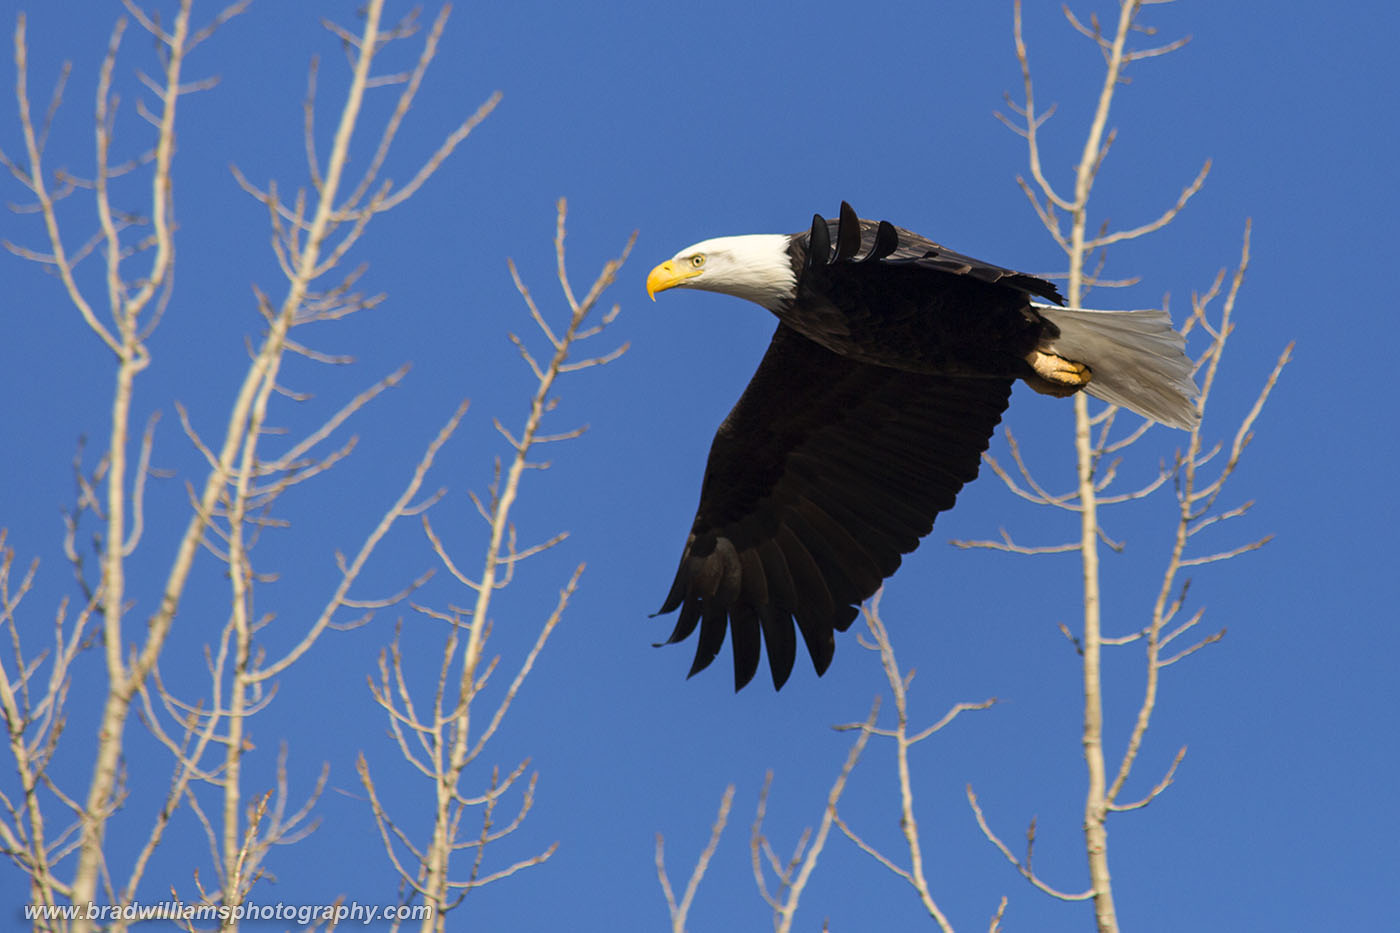 Thomas Jefferson - A majestic bald eagle sits high in a cottonwood tree on a beautiful late winter afternoon.